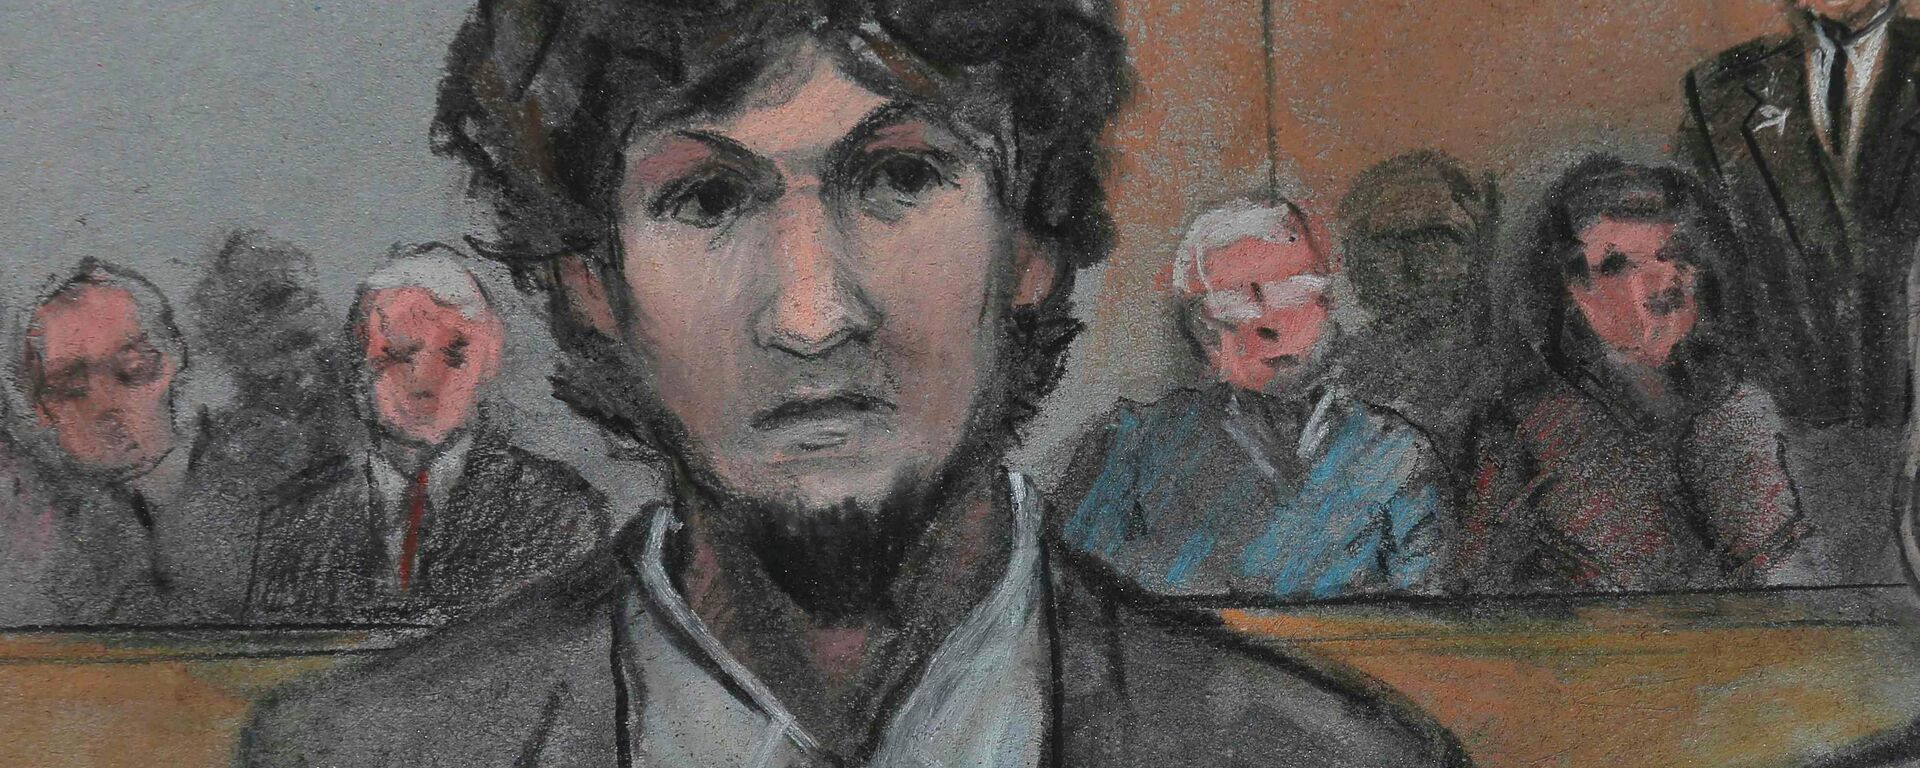 Boston Marathon bomber Dzhokhar Tsarnaev is shown in a courtroom sketch after he is sentenced at the federal courthouse in Boston, Massachusetts May 15, 2015 - Sputnik International, 1920, 13.10.2021